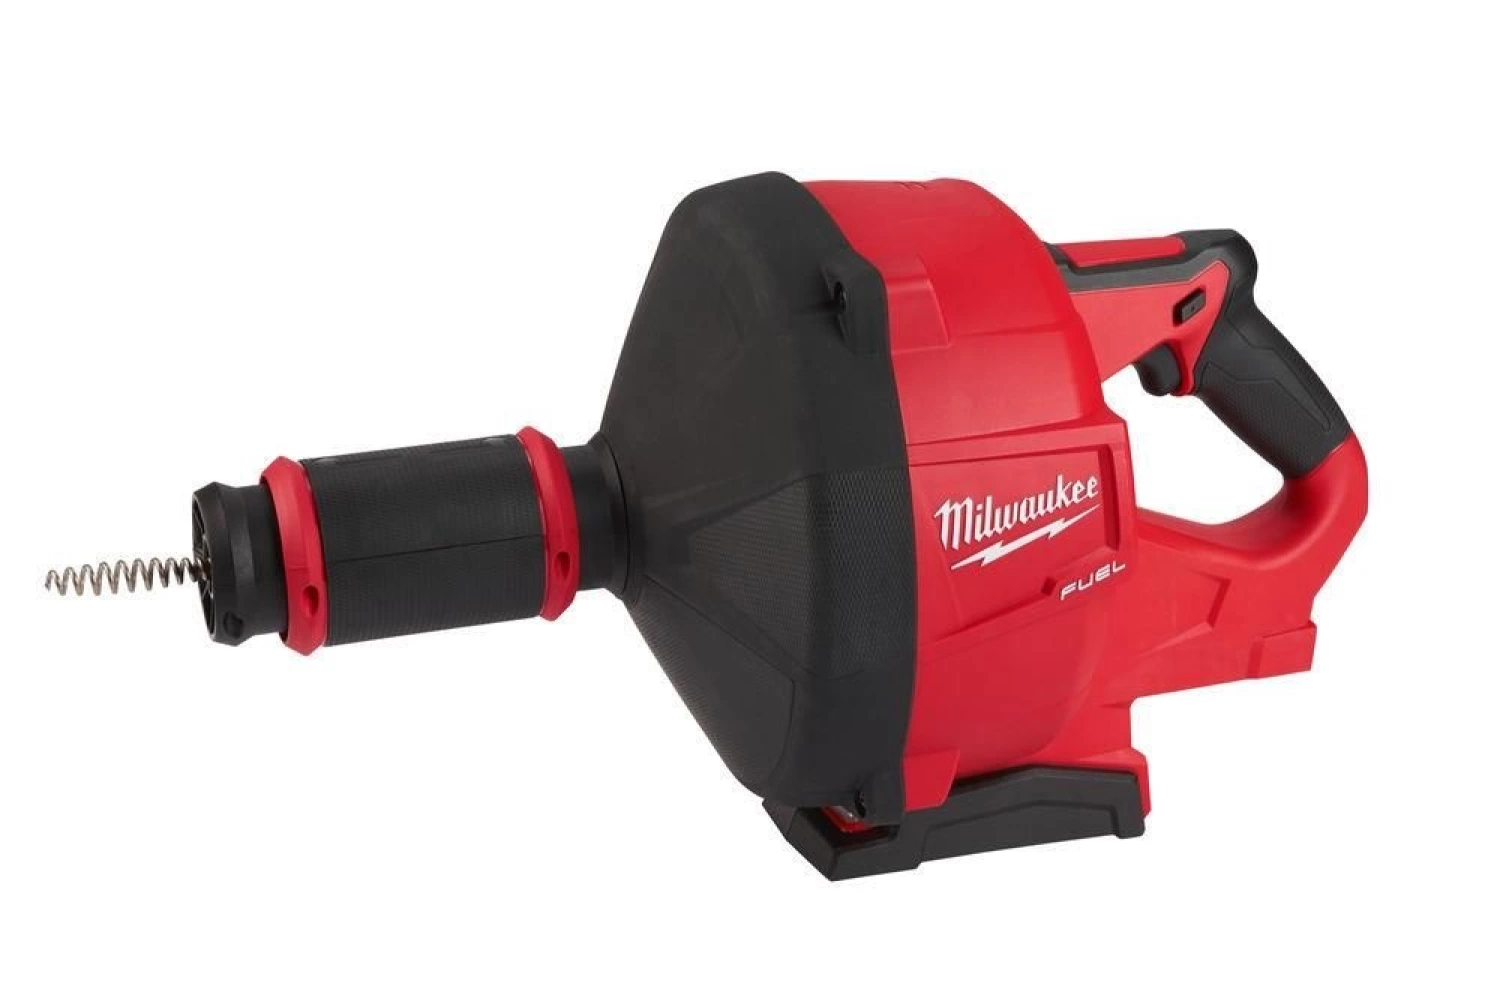 Milwaukee M18 FDCPF8-0C 18V Li-Ion accu Ontstoppingsmachine body in emmer-image